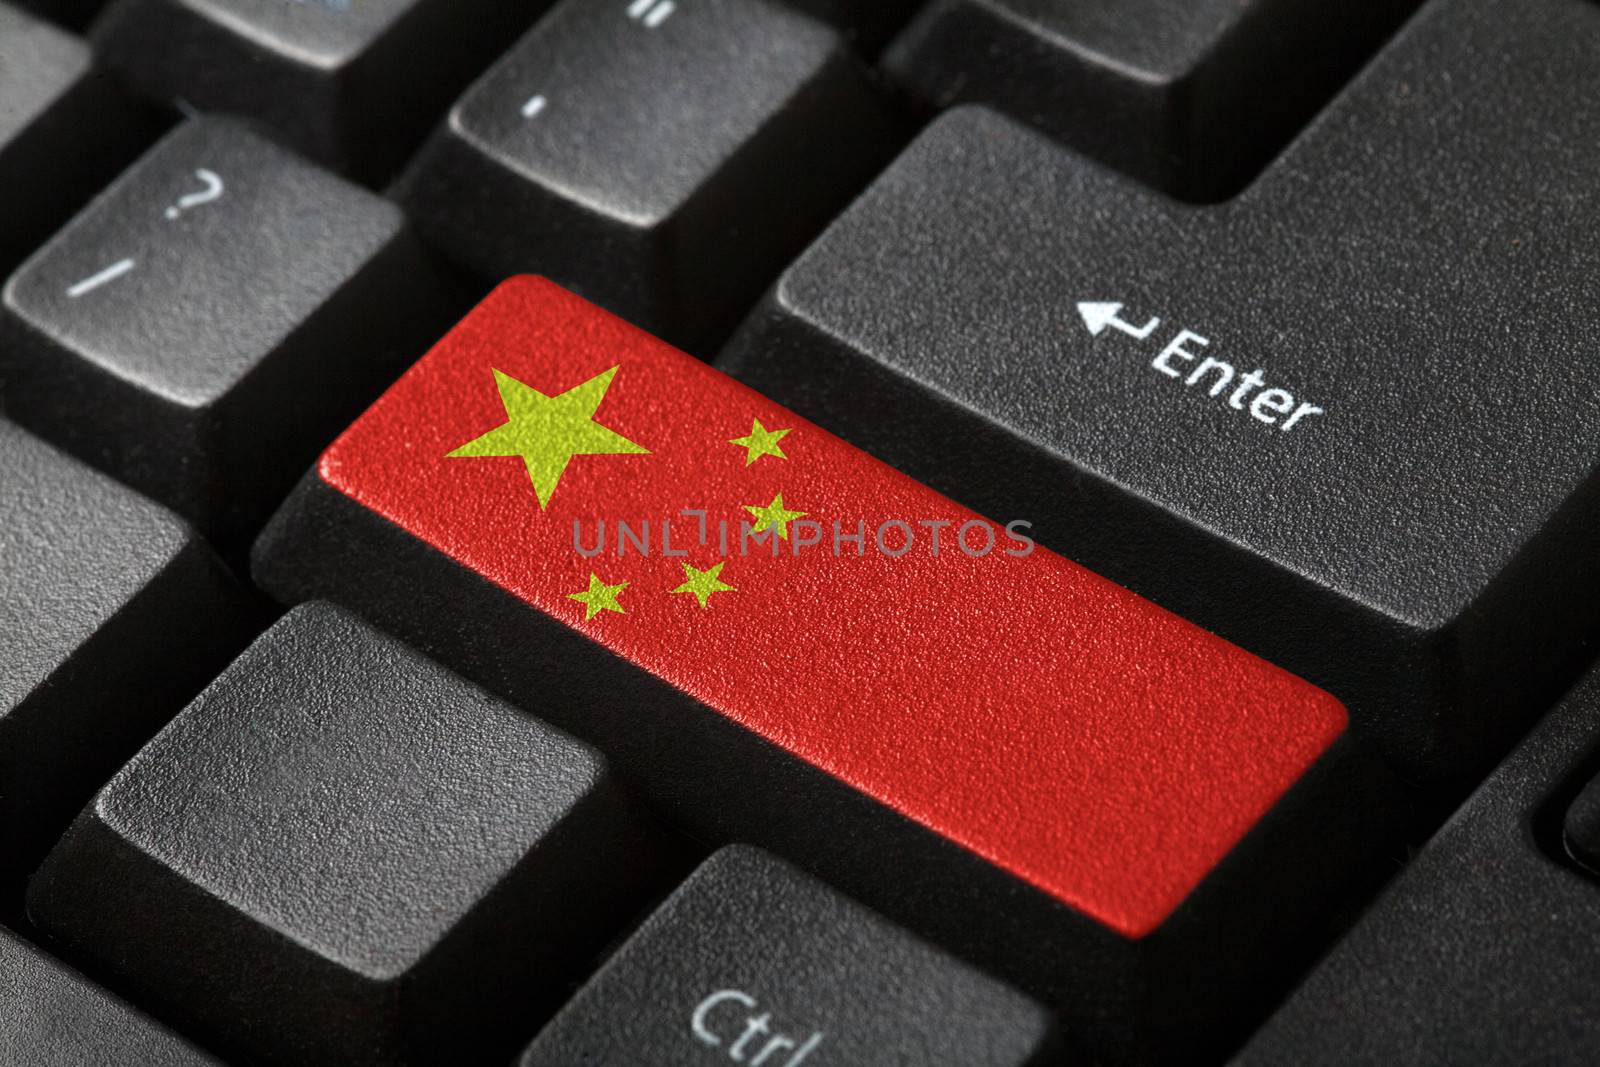 The Chinese flag button on the keyboard. close-up